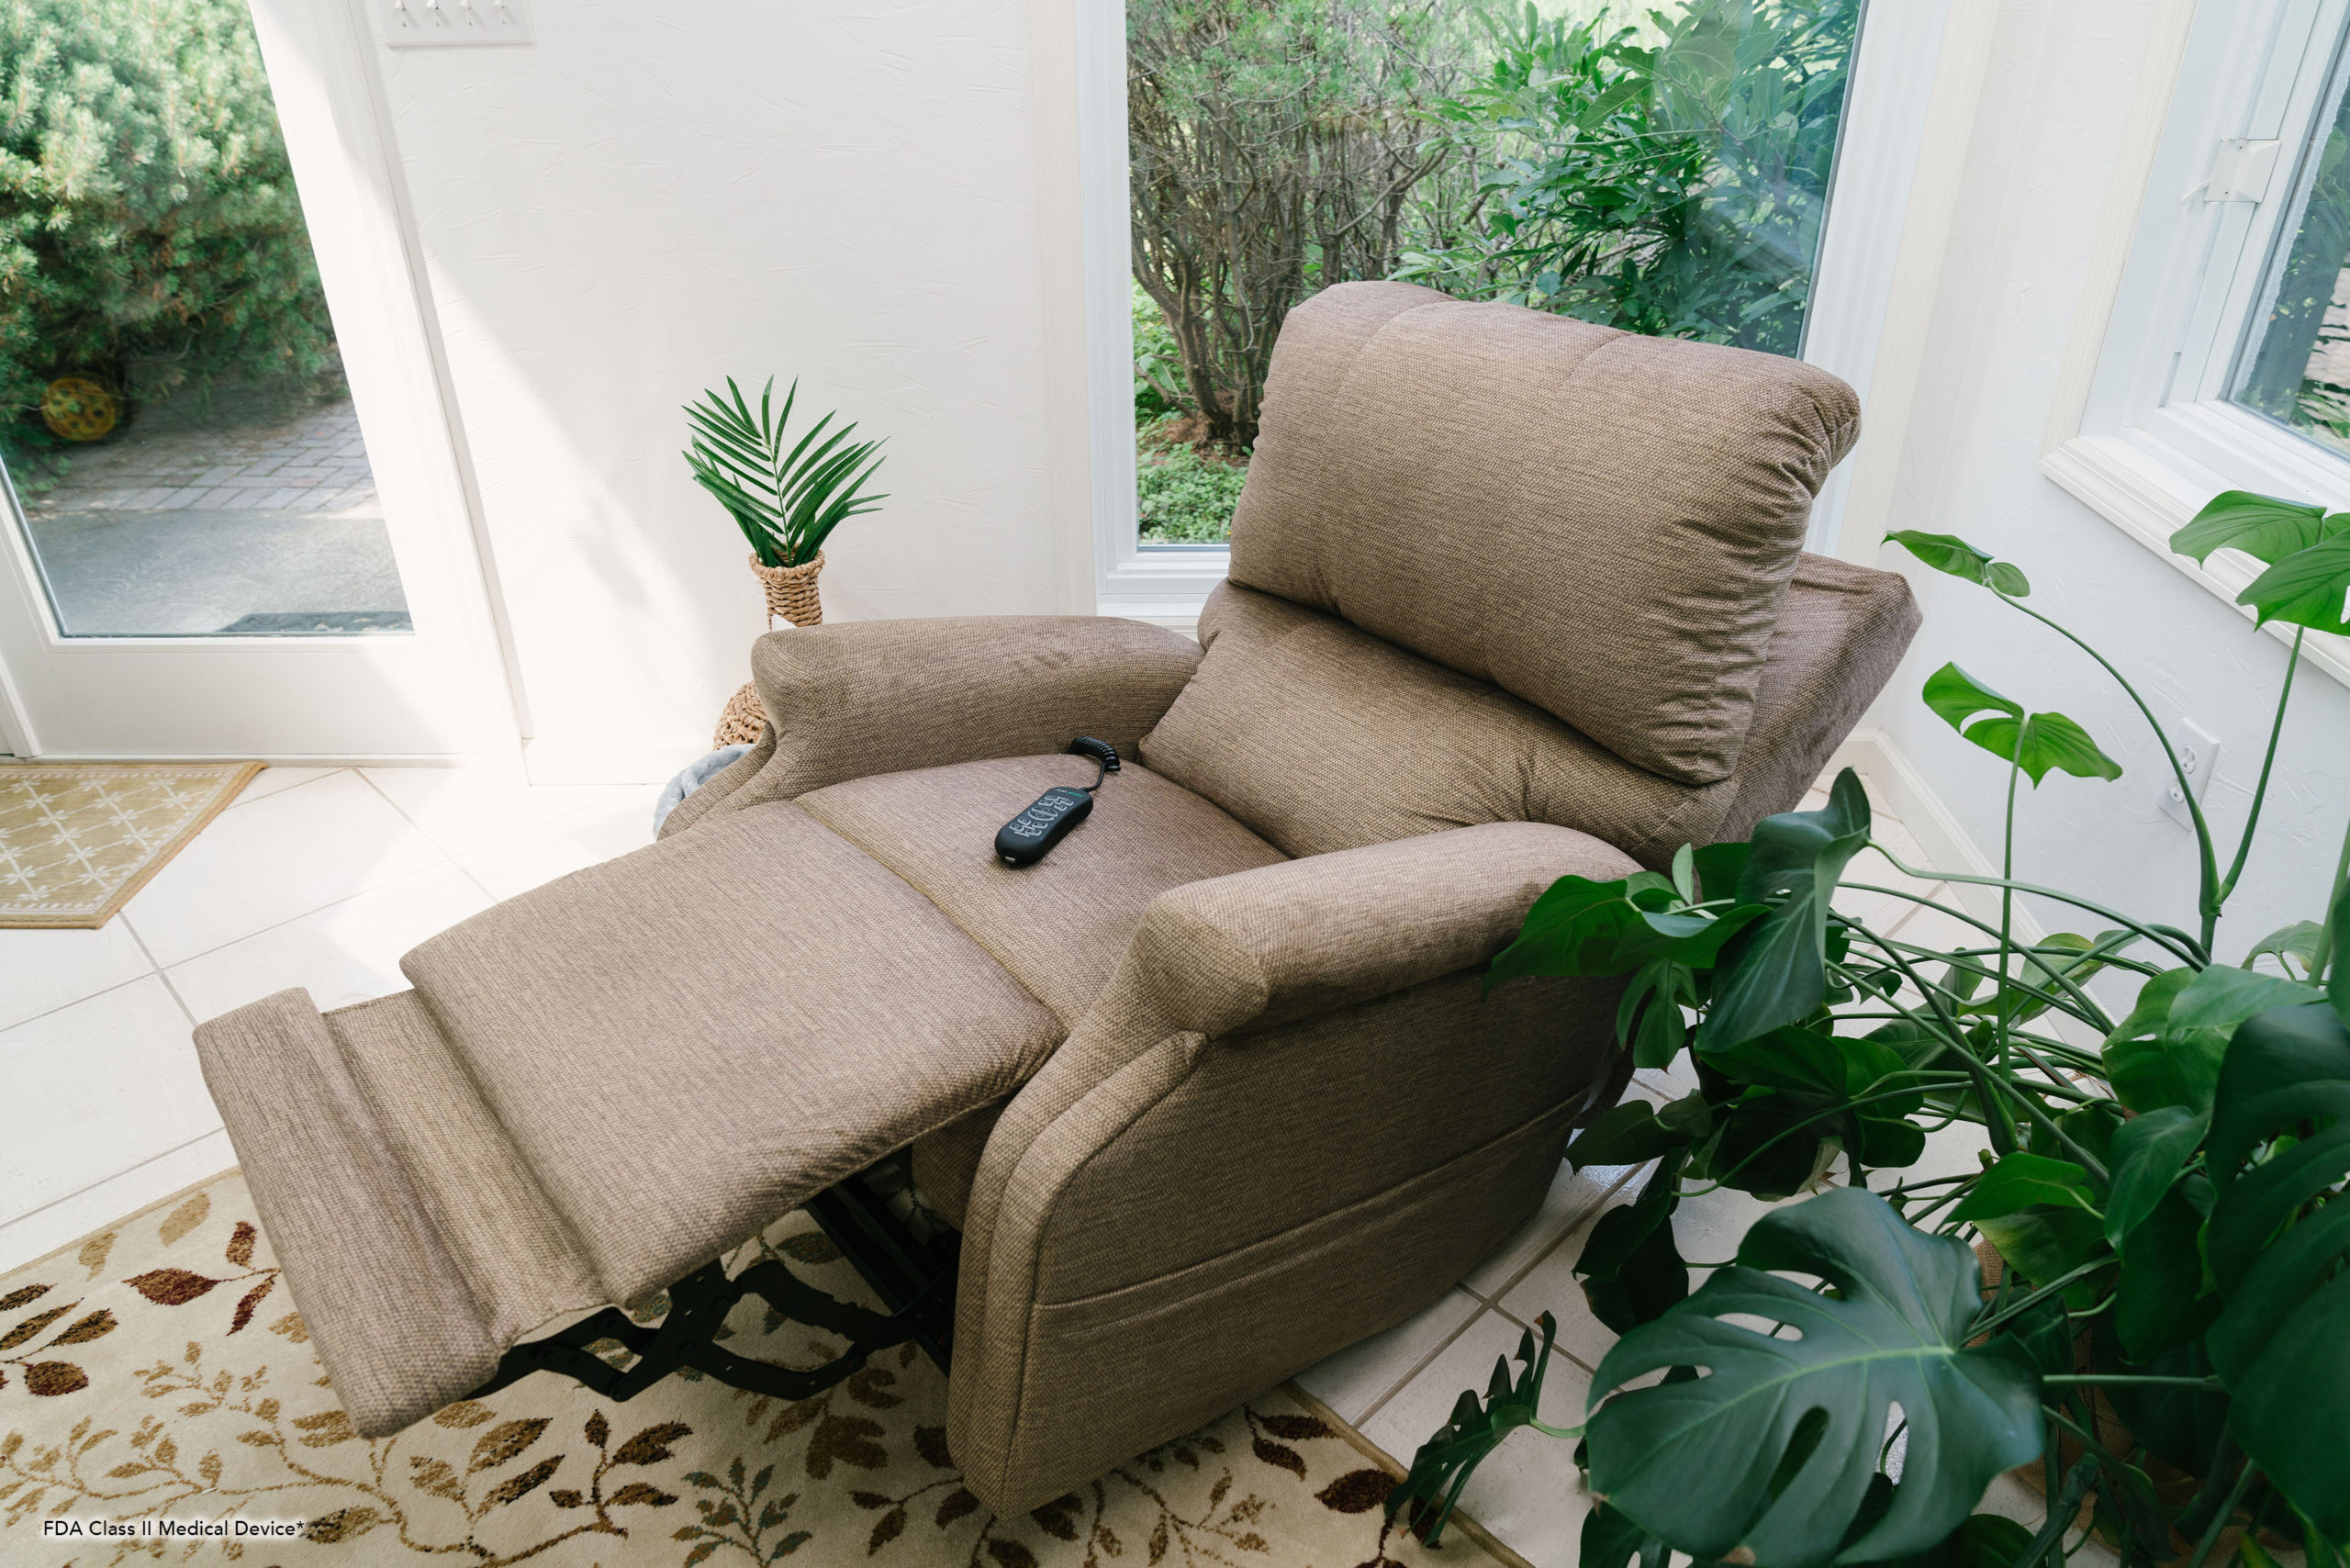 Adjustable lounge chair with remote control